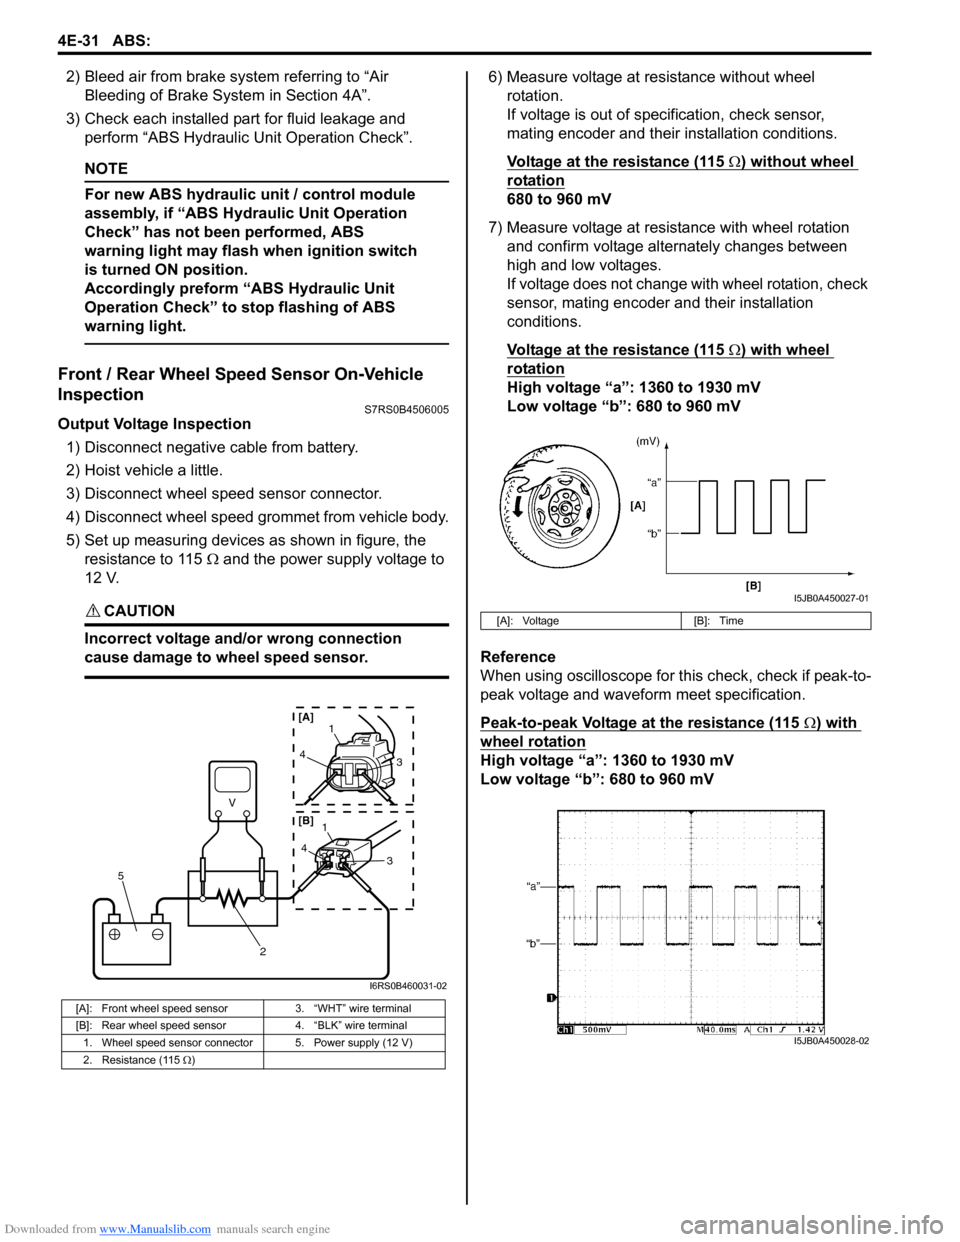 SUZUKI SWIFT 2006 2.G Service Workshop Manual Downloaded from www.Manualslib.com manuals search engine 4E-31 ABS: 
2) Bleed air from brake system referring to “Air Bleeding of Brake System in Section 4A”.
3) Check each installed part for flui